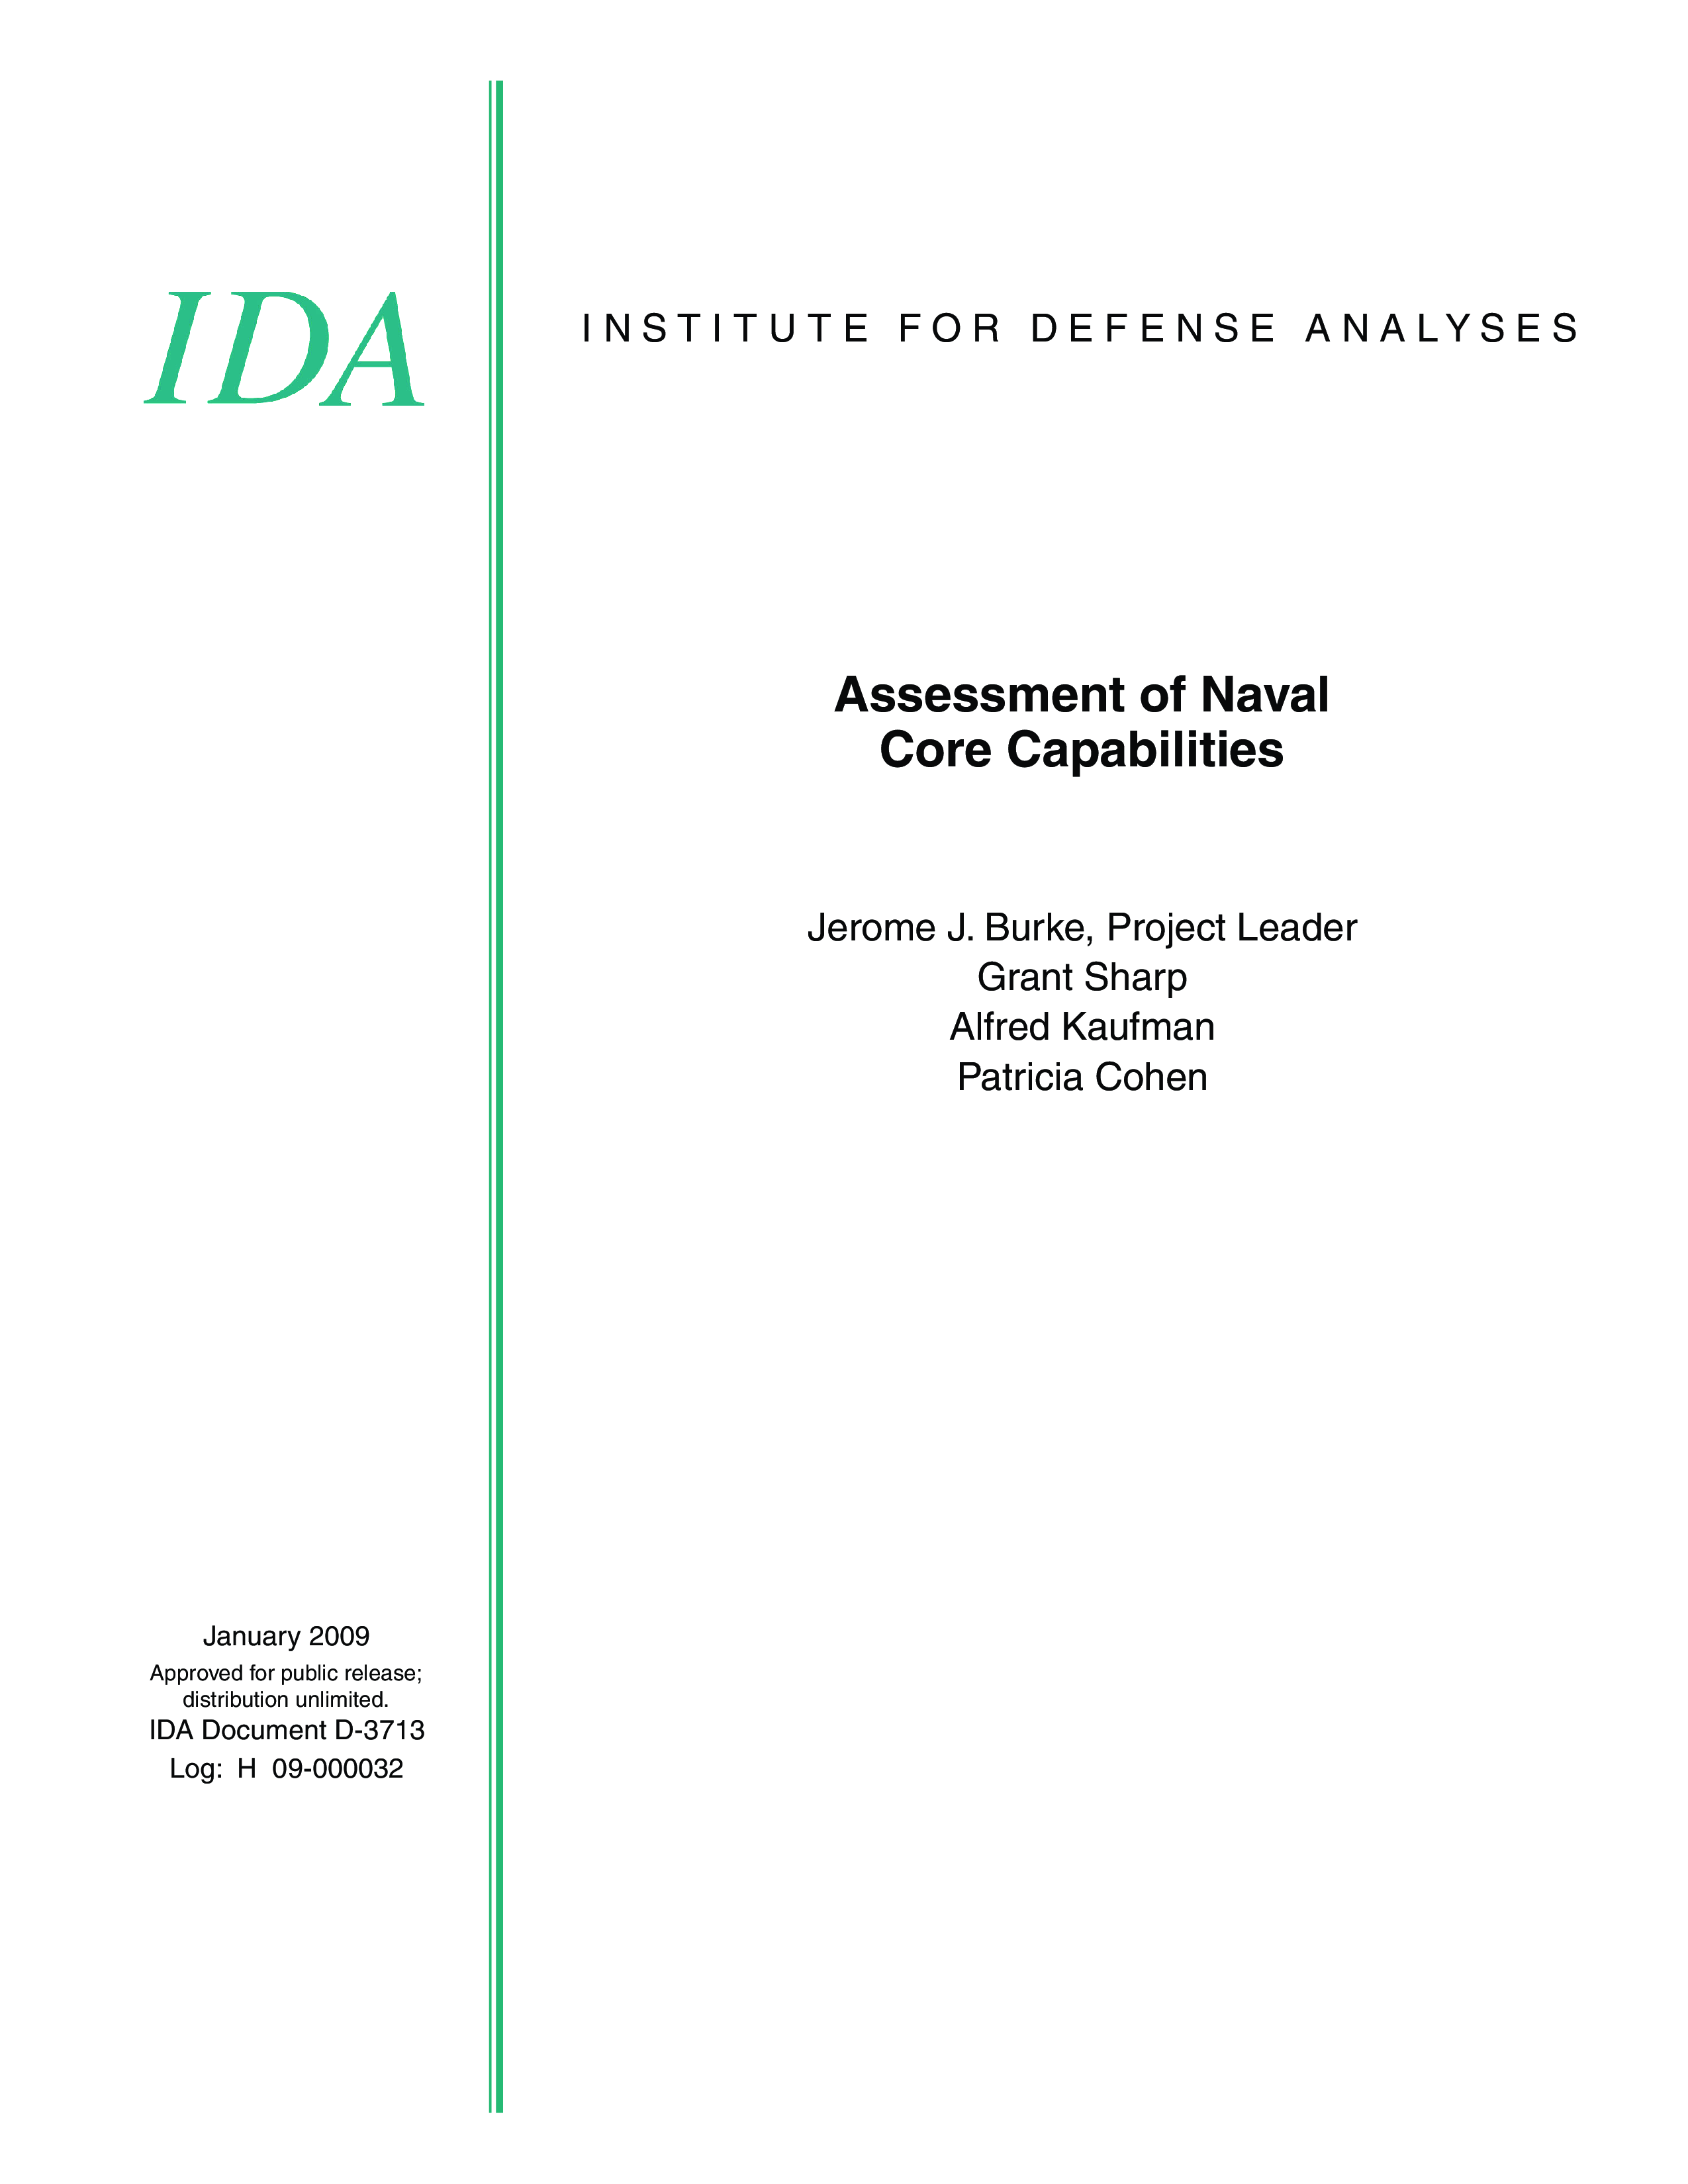 Assessment of Naval Core Capabilities